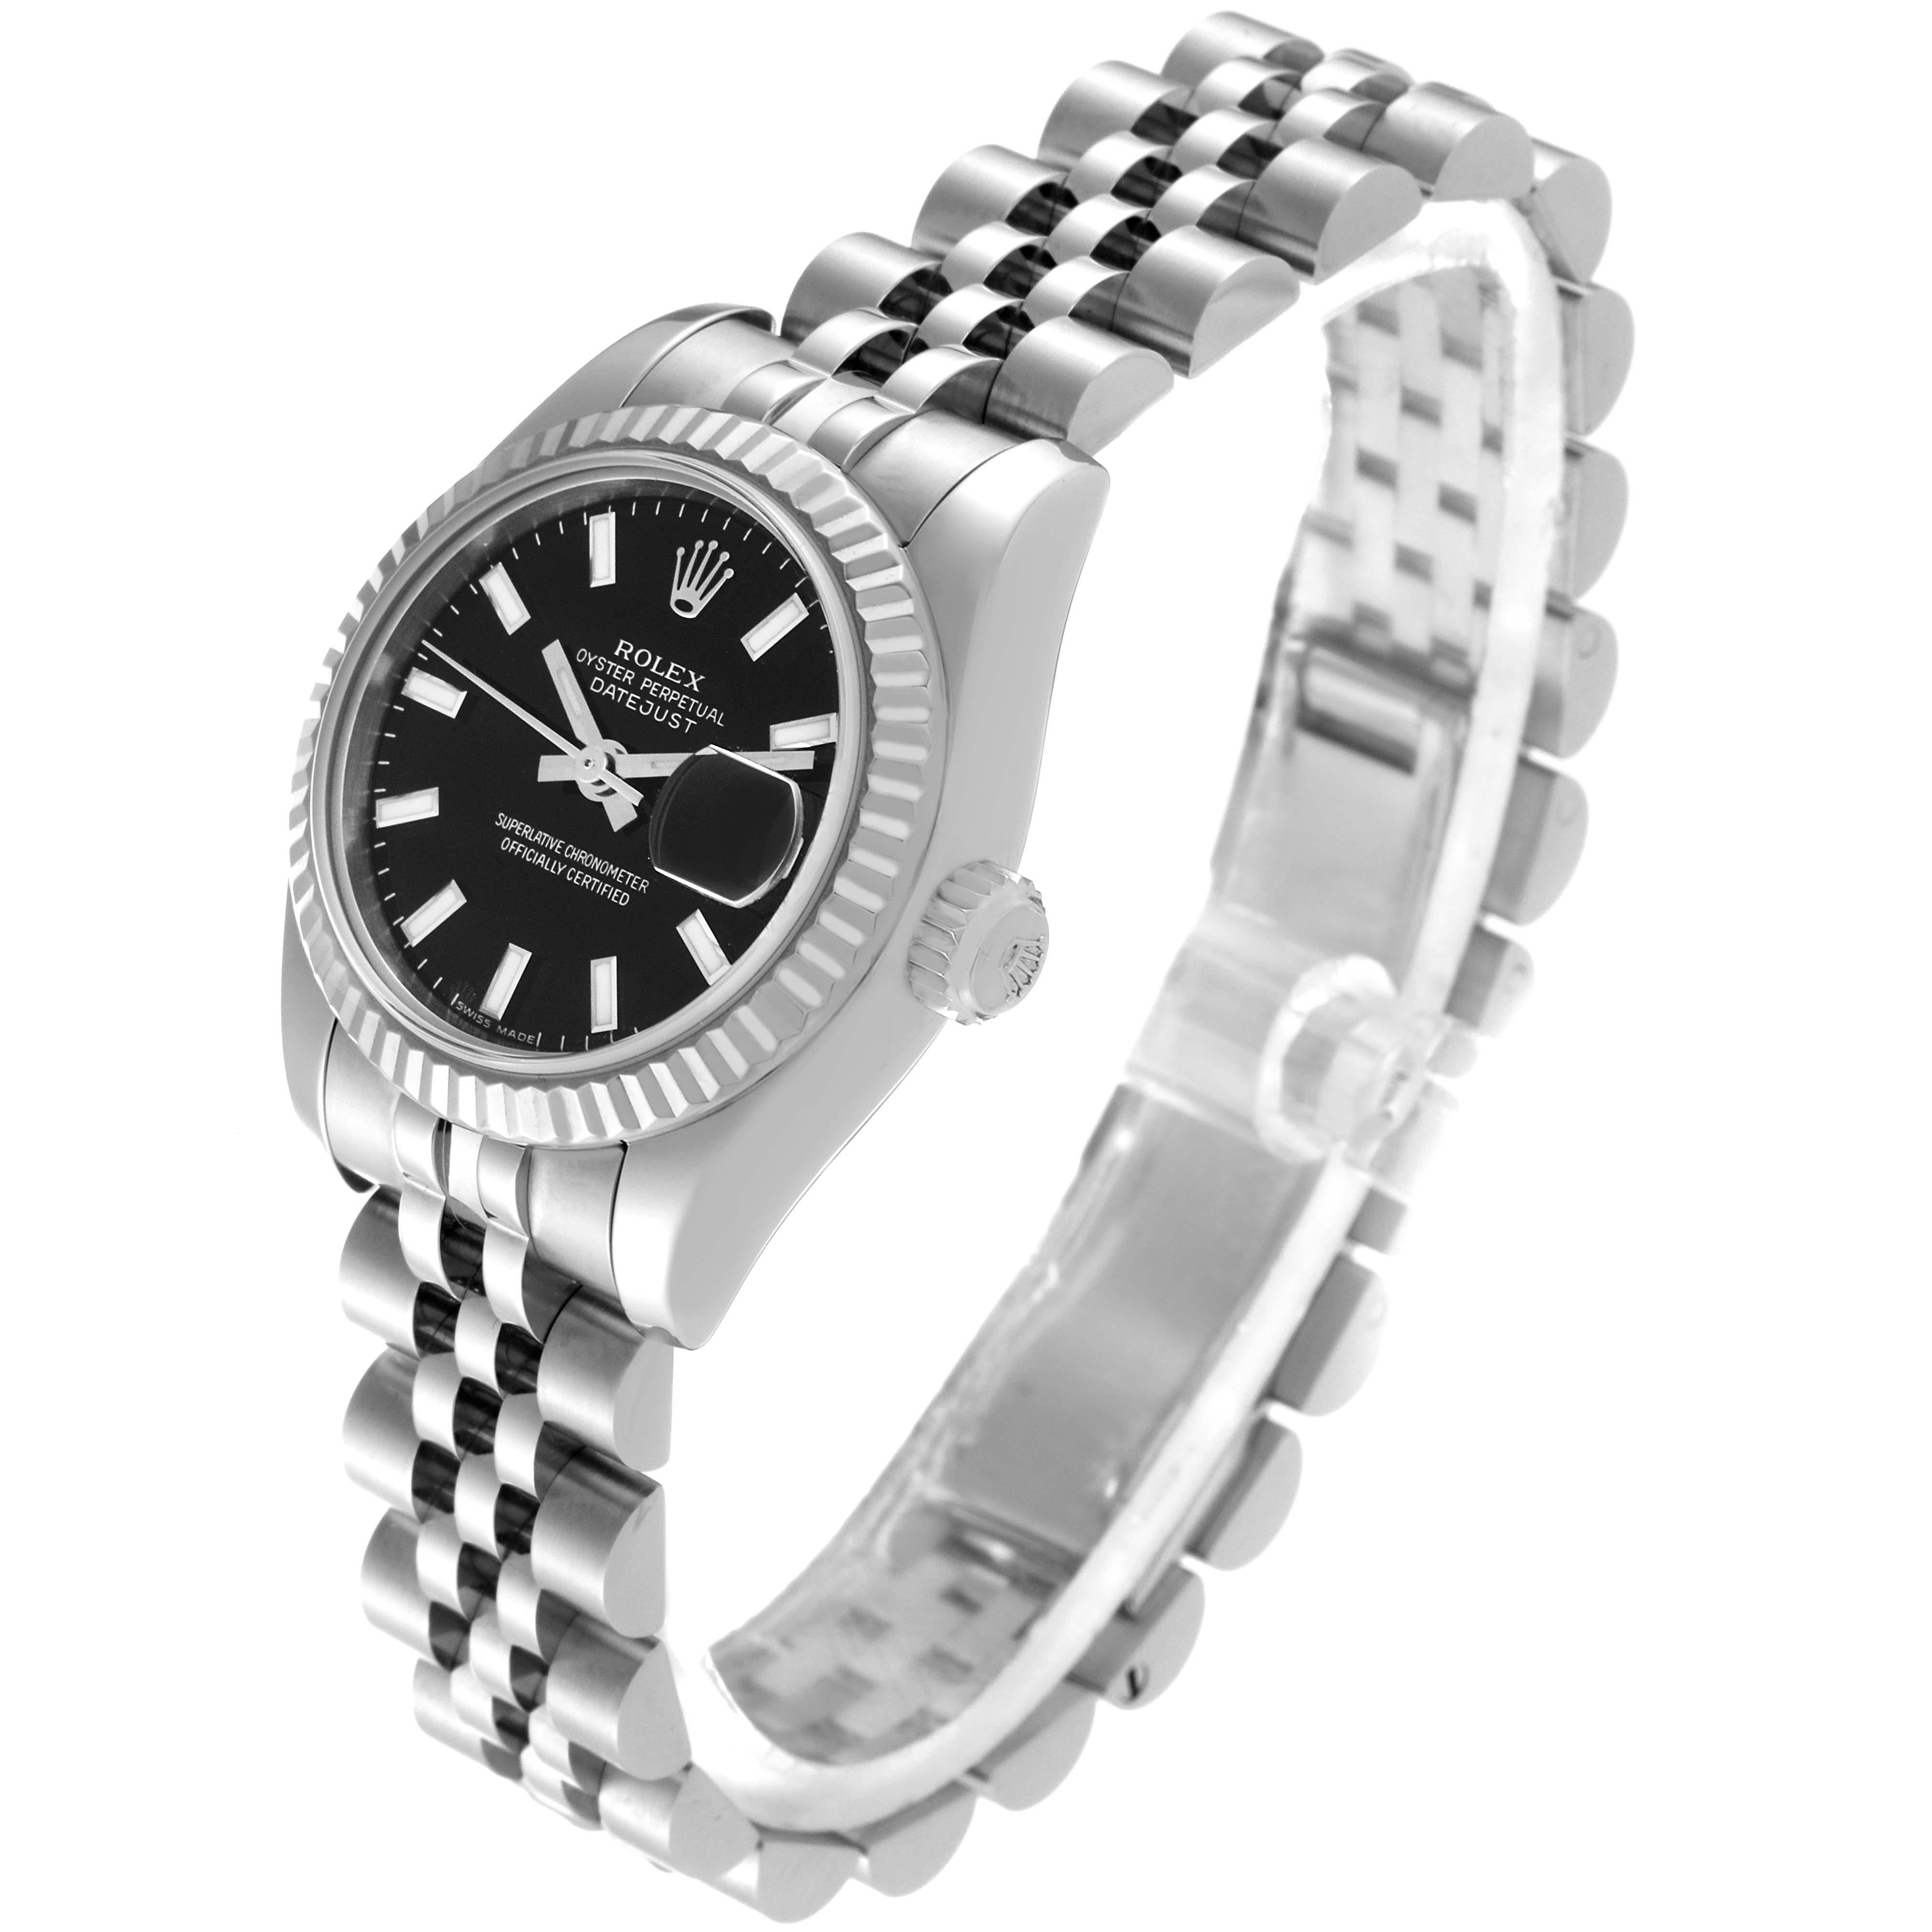 Rolex Datejust Steel White Gold Black Dial Ladies Watch 179174 Box Card For Sale 2